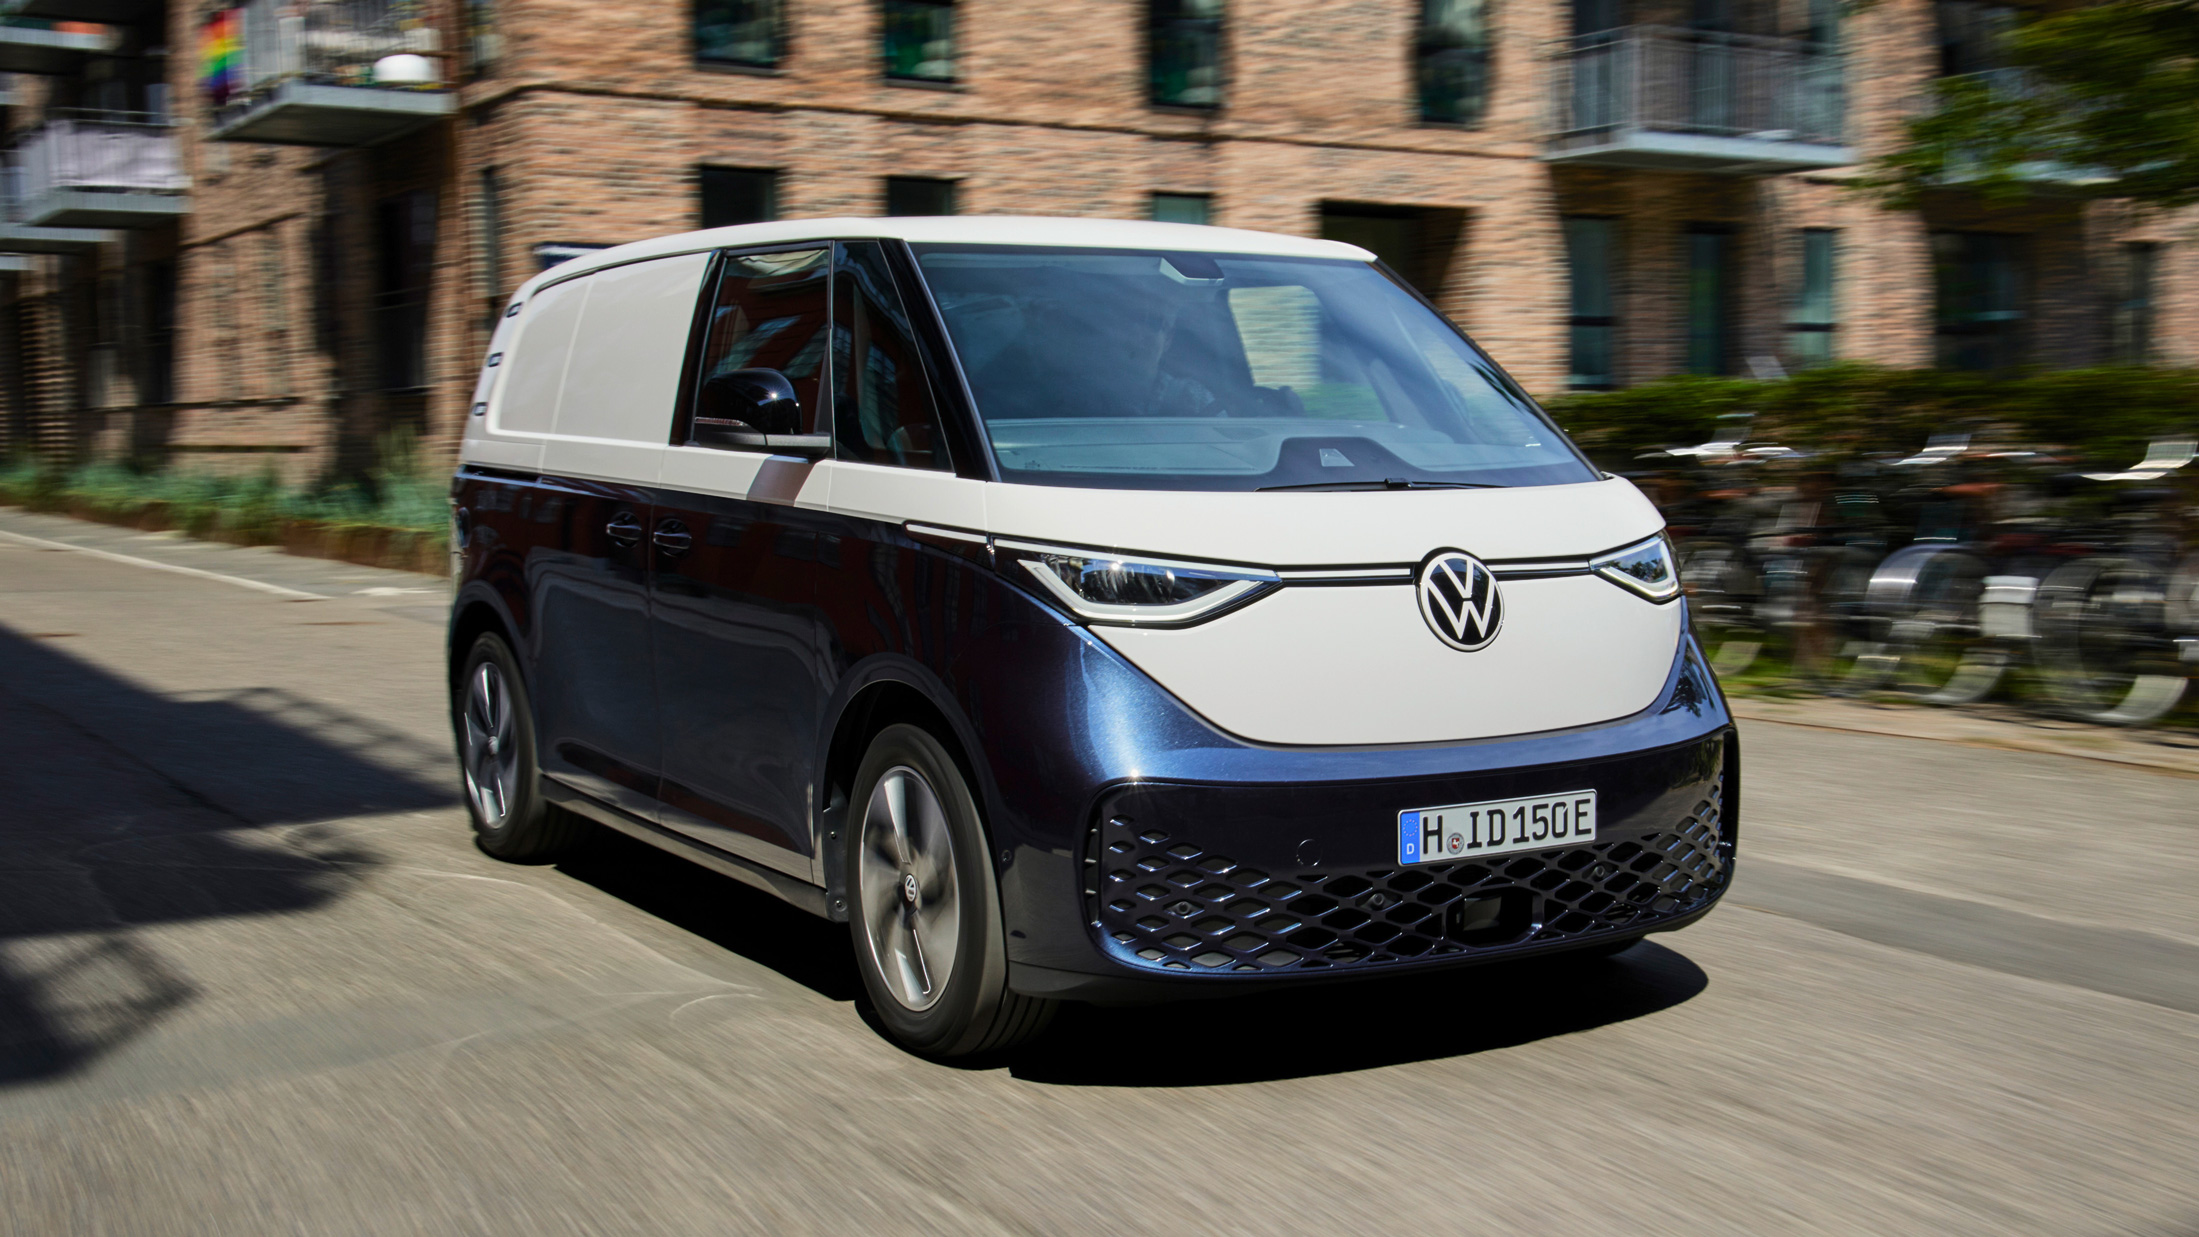 https://e-vehicleinfo.com/global/top-10-electric-delivery-vans-around-world/